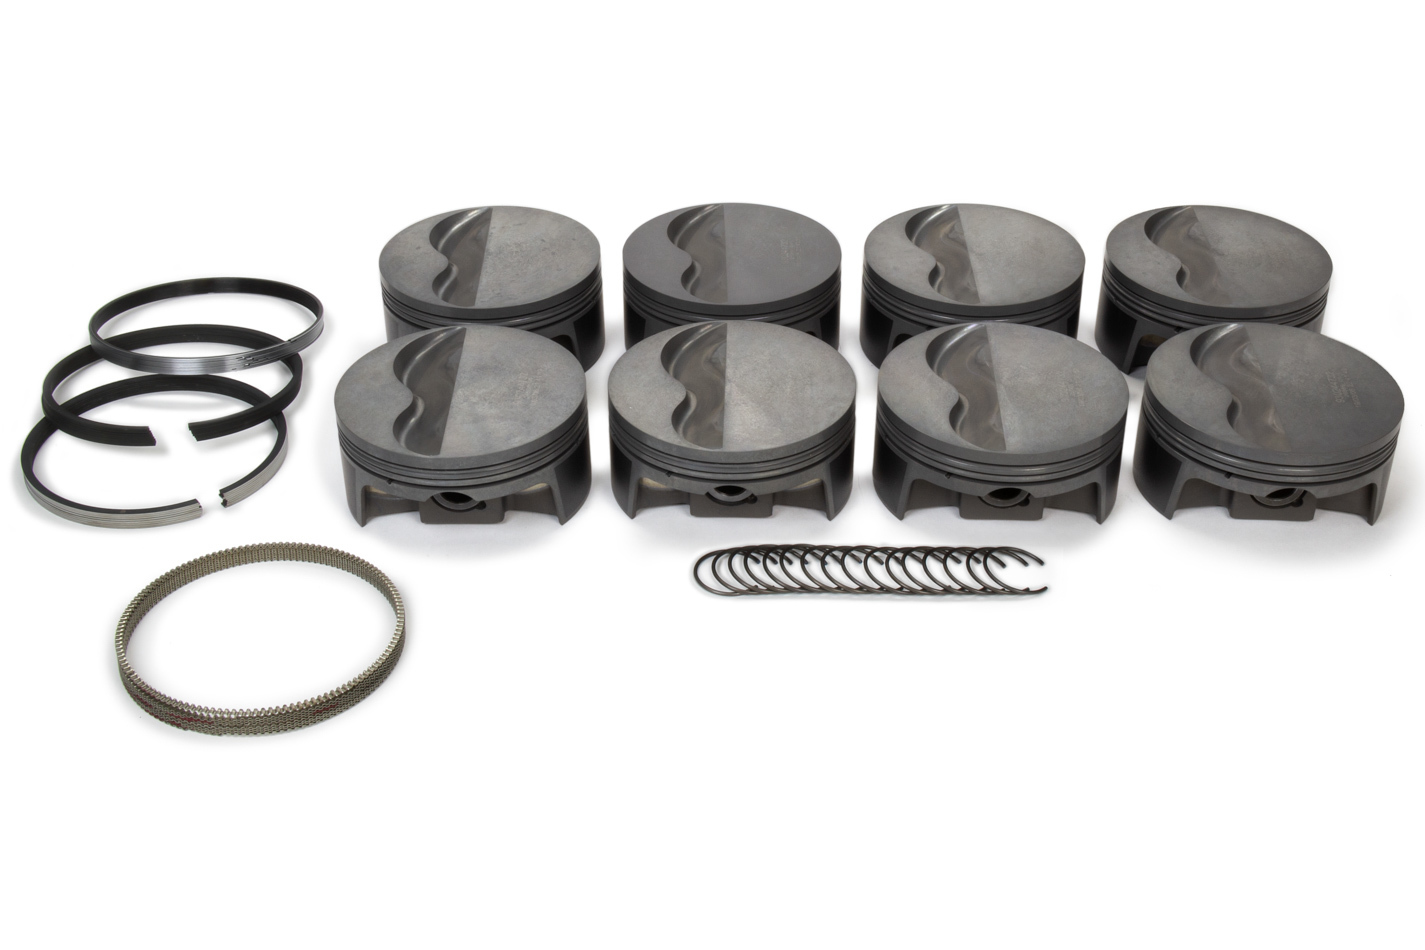 Mahle Pistons 930244732 Pistons and Rings, PowerPak, Forged, 4.032 in Bore, 1.0 x 1.0 x 2.0 mm Ring Grooves, Minus 6.50 cc, Small Block Ford, Kit